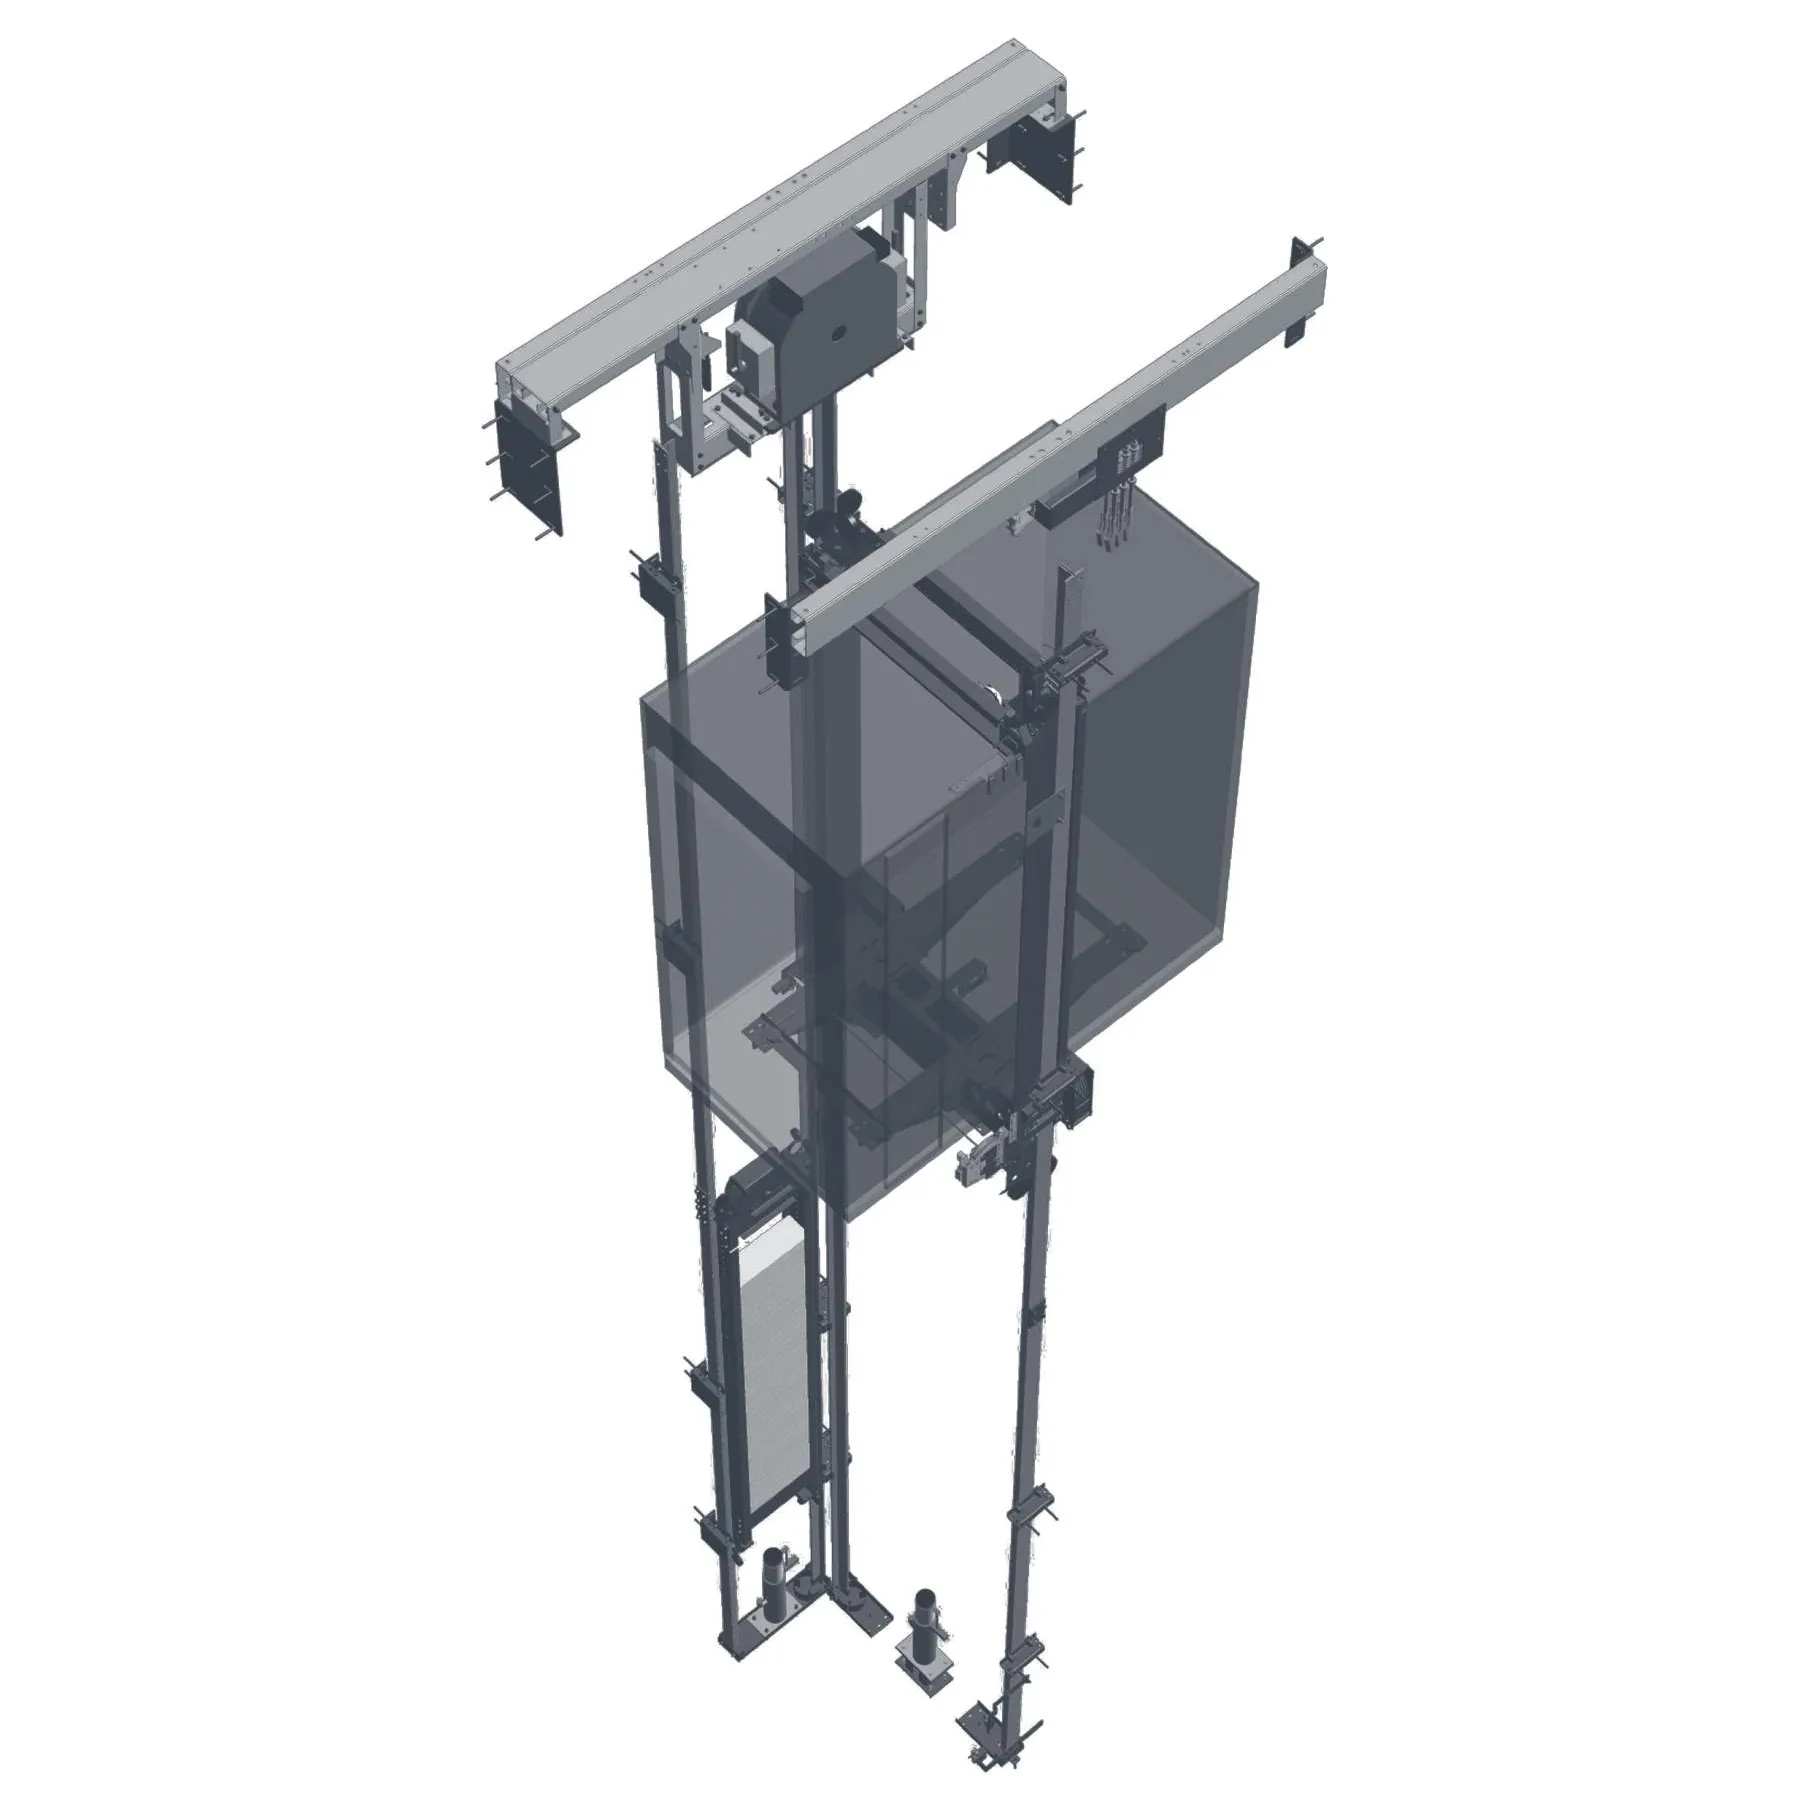 Outstanding mechanical lift packages for MRL applications from SILENS RANGE for lift installation companies